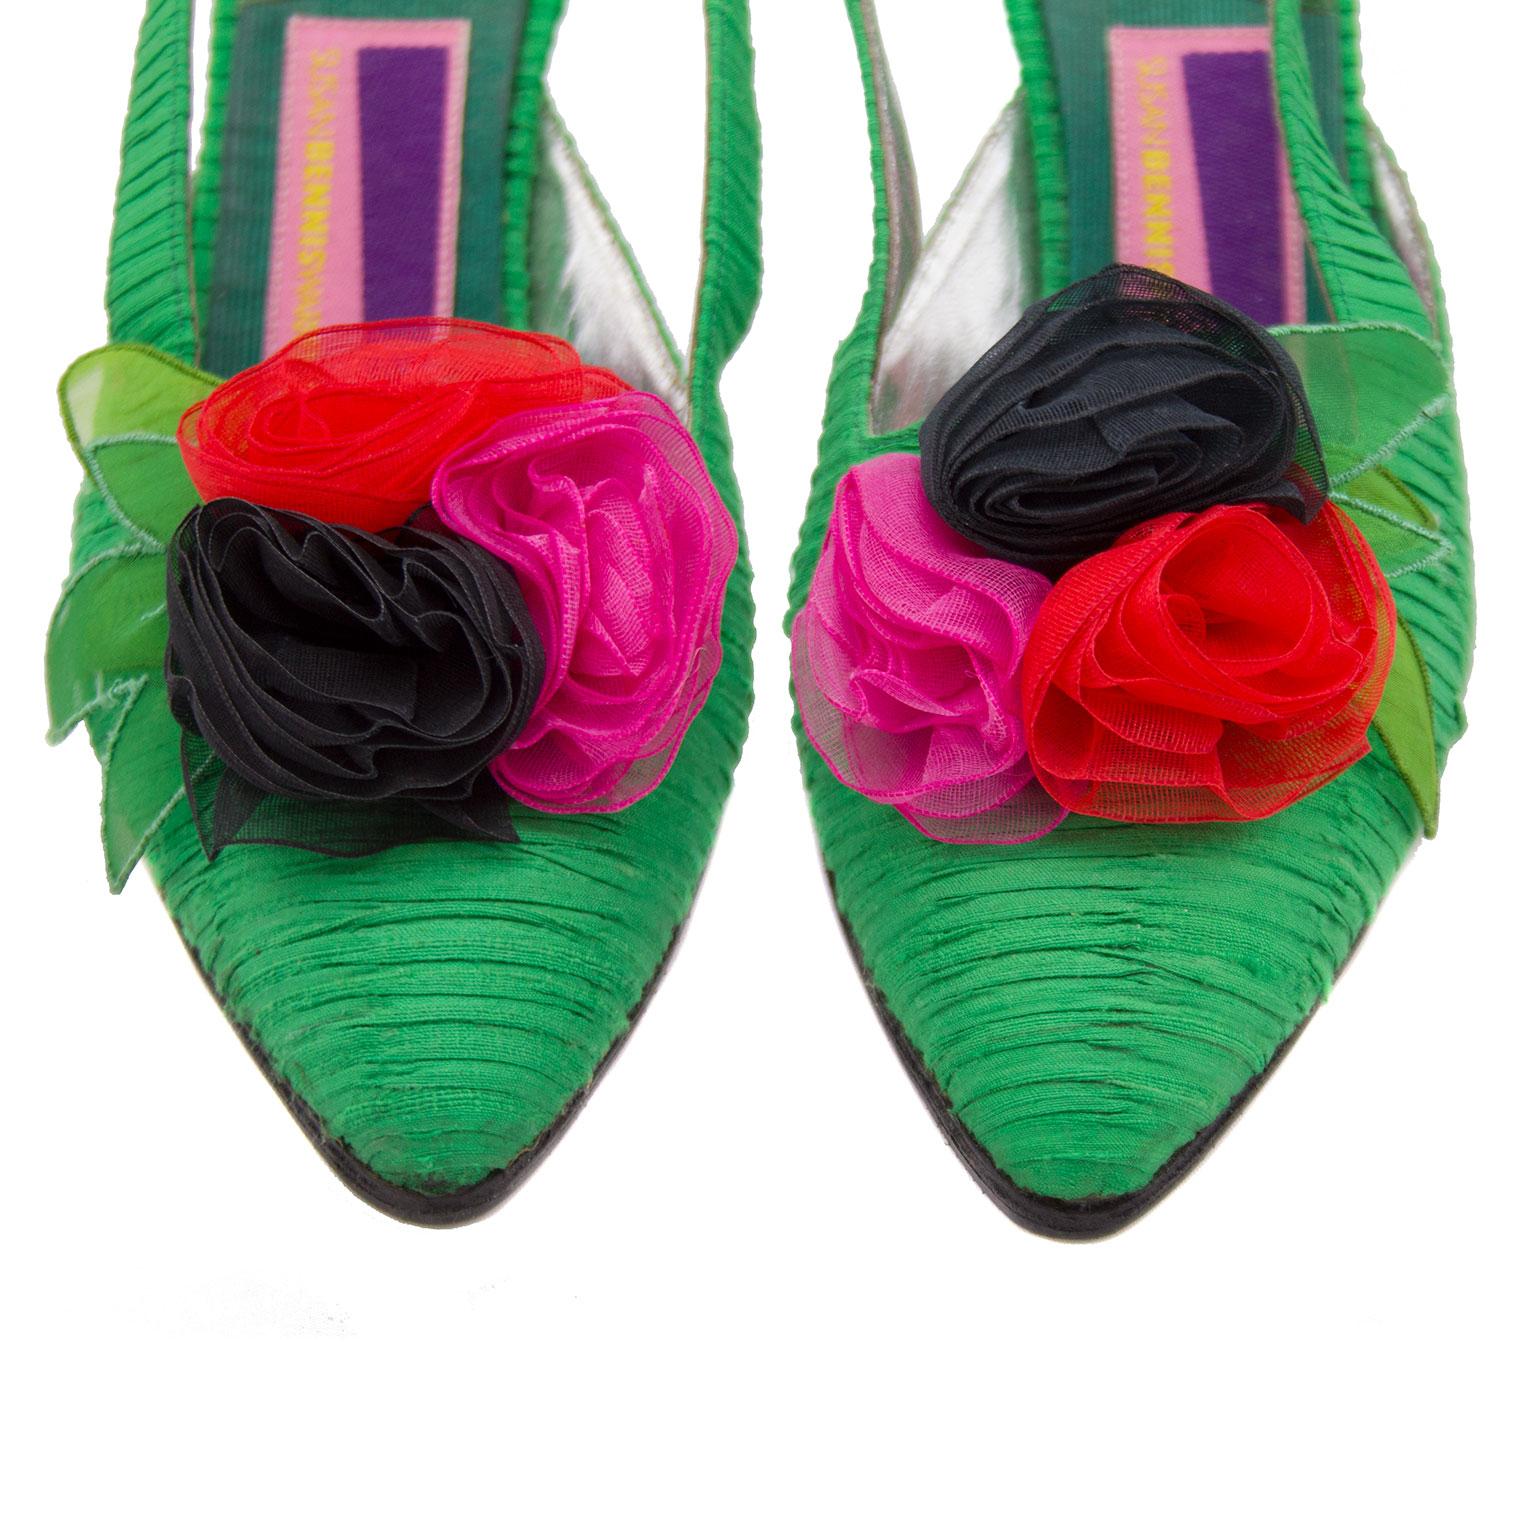 Beautiful pair of pointed toe slingback heels by Susan Bennis Warren Edwards from 1988. Covered in an emerald green pleated silk, the toe box is adorned with organza rosettes. In excellent condition, bottoms have been resoled. These shoes have been